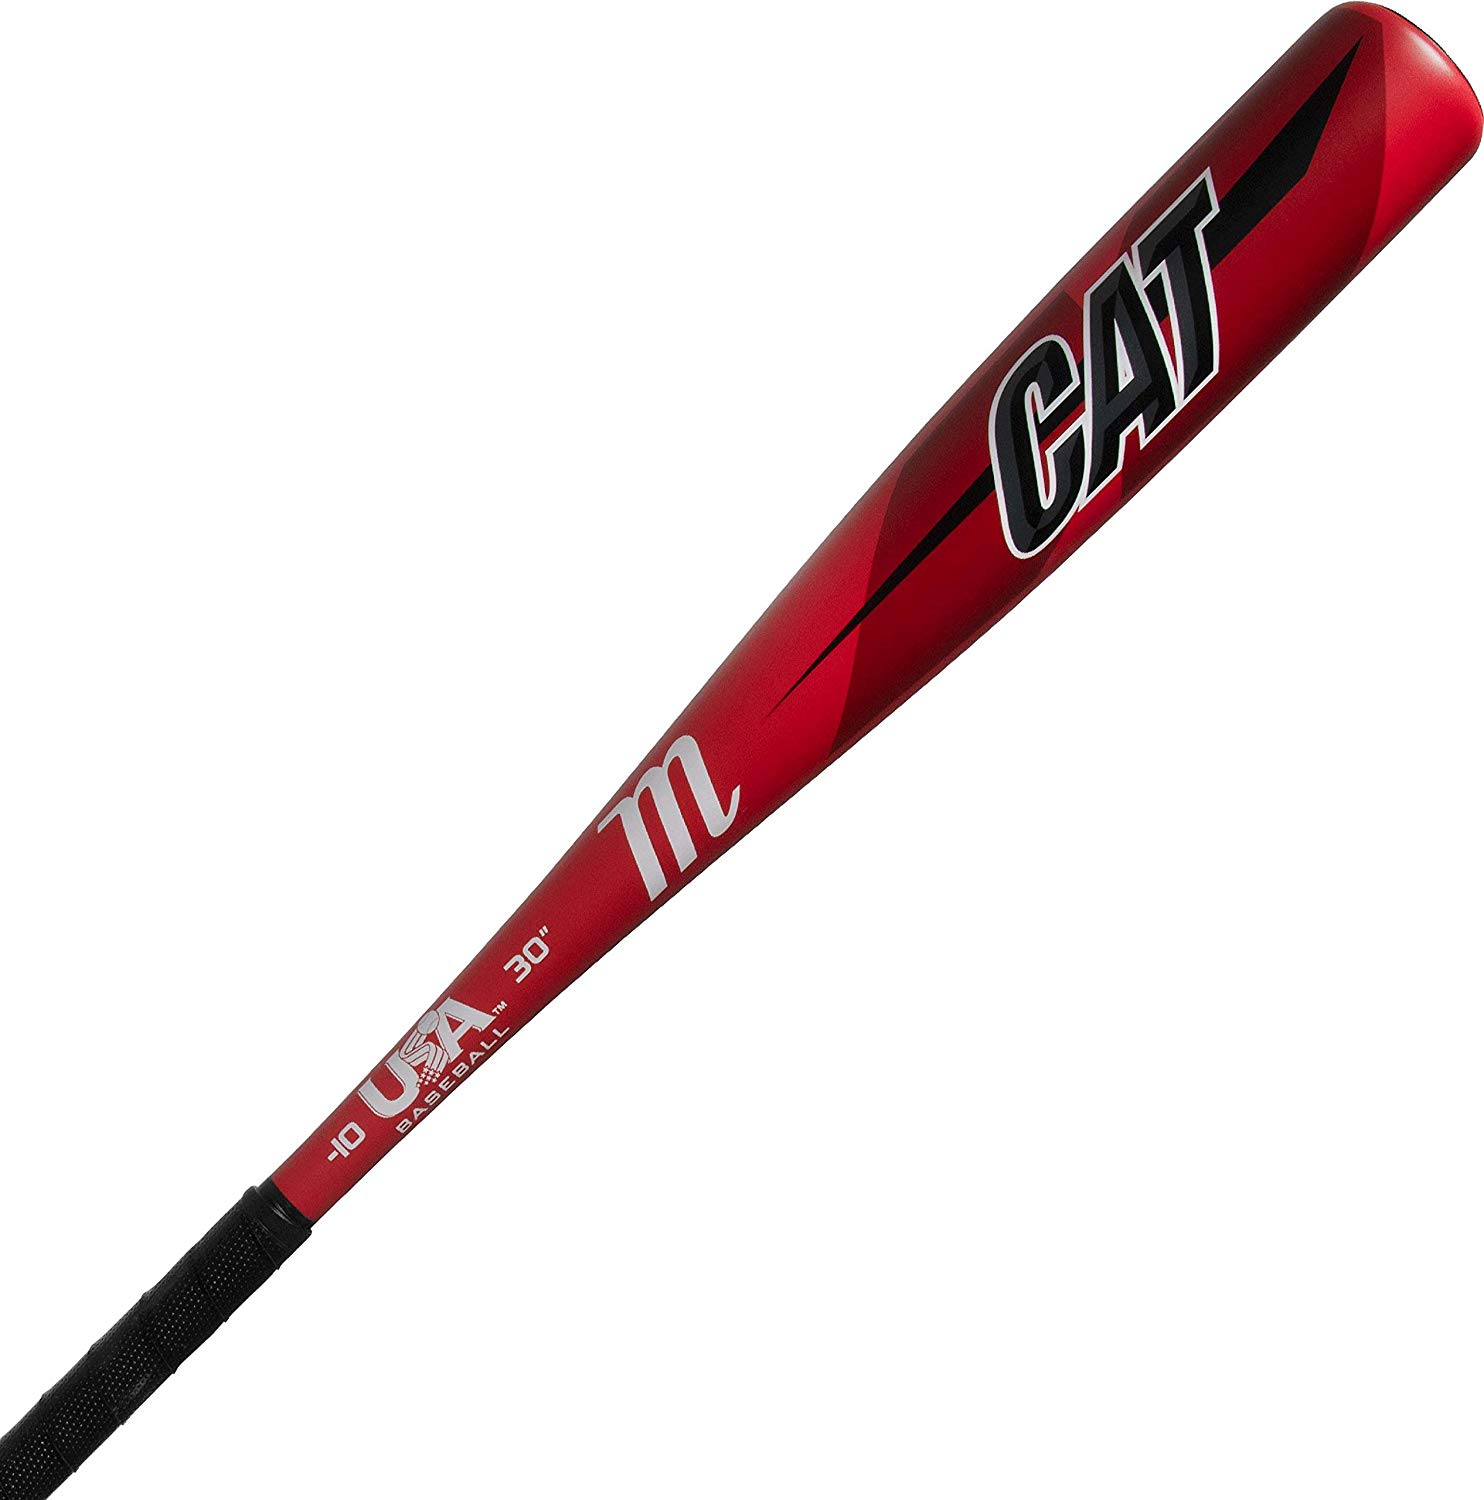 -10 Length to Weight Ratio 2 5/8 Inch Barrel Diameter Precision-Balanced Approved for play in USA Baseball 1 Year Manufacturer's Warranty